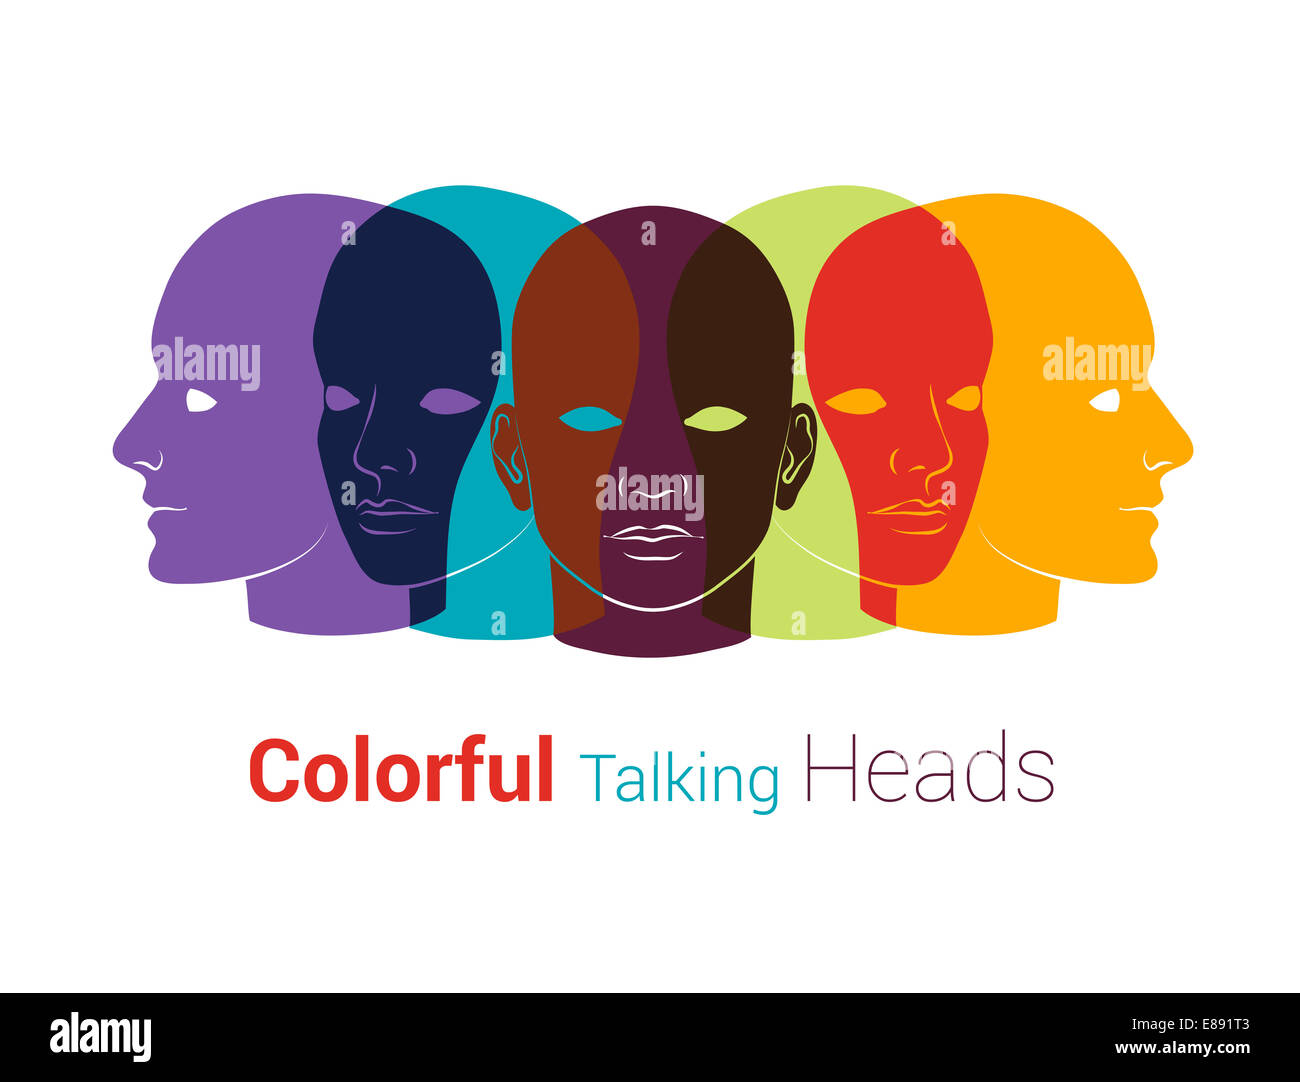 Human heads silhouettes. Group of people talking, working together. Concept illustration Stock Photo